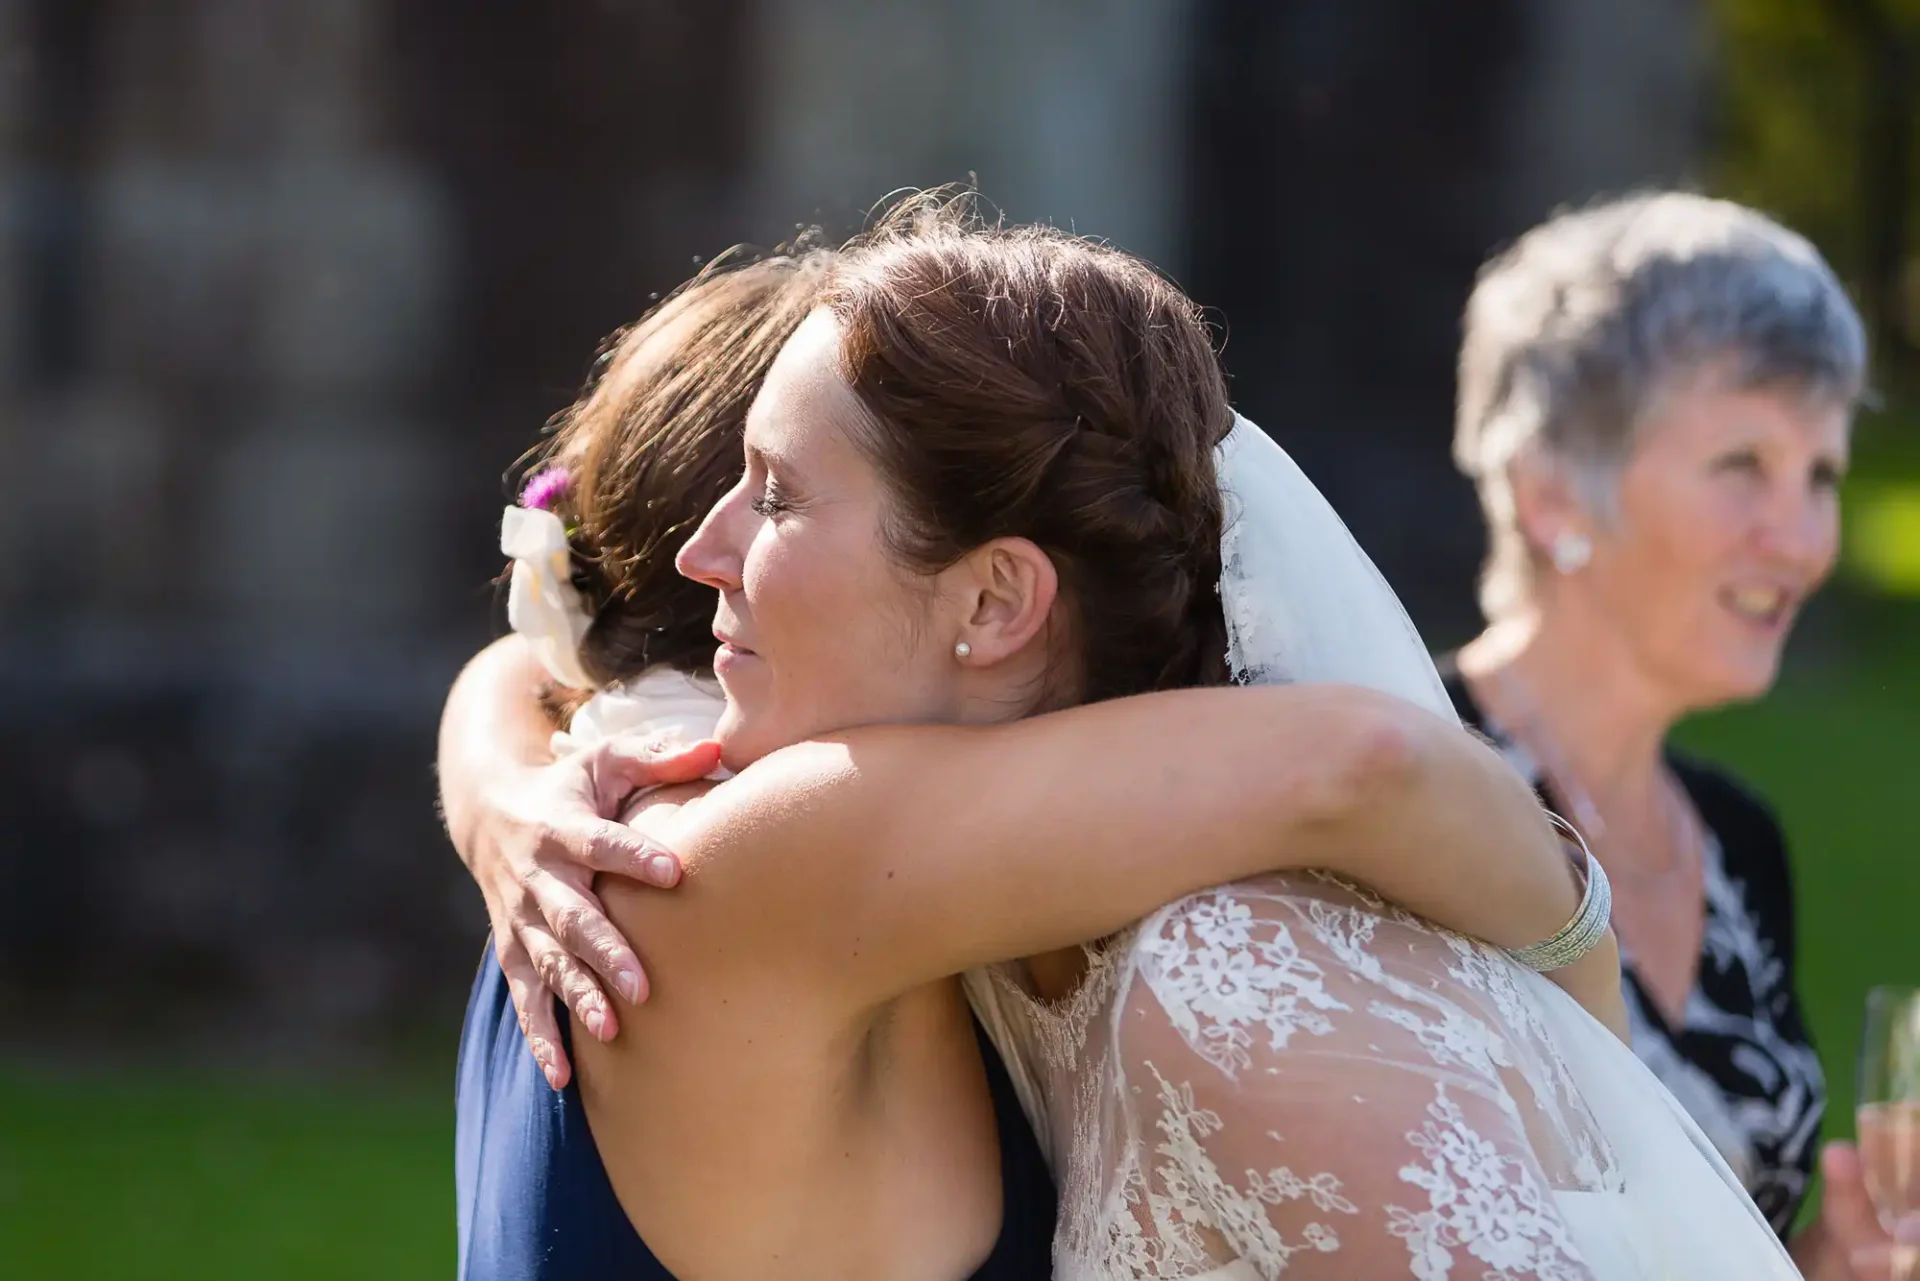 Bride in a lace dress embracing a bridesmaid with an older woman smiling in the background at an outdoor wedding.